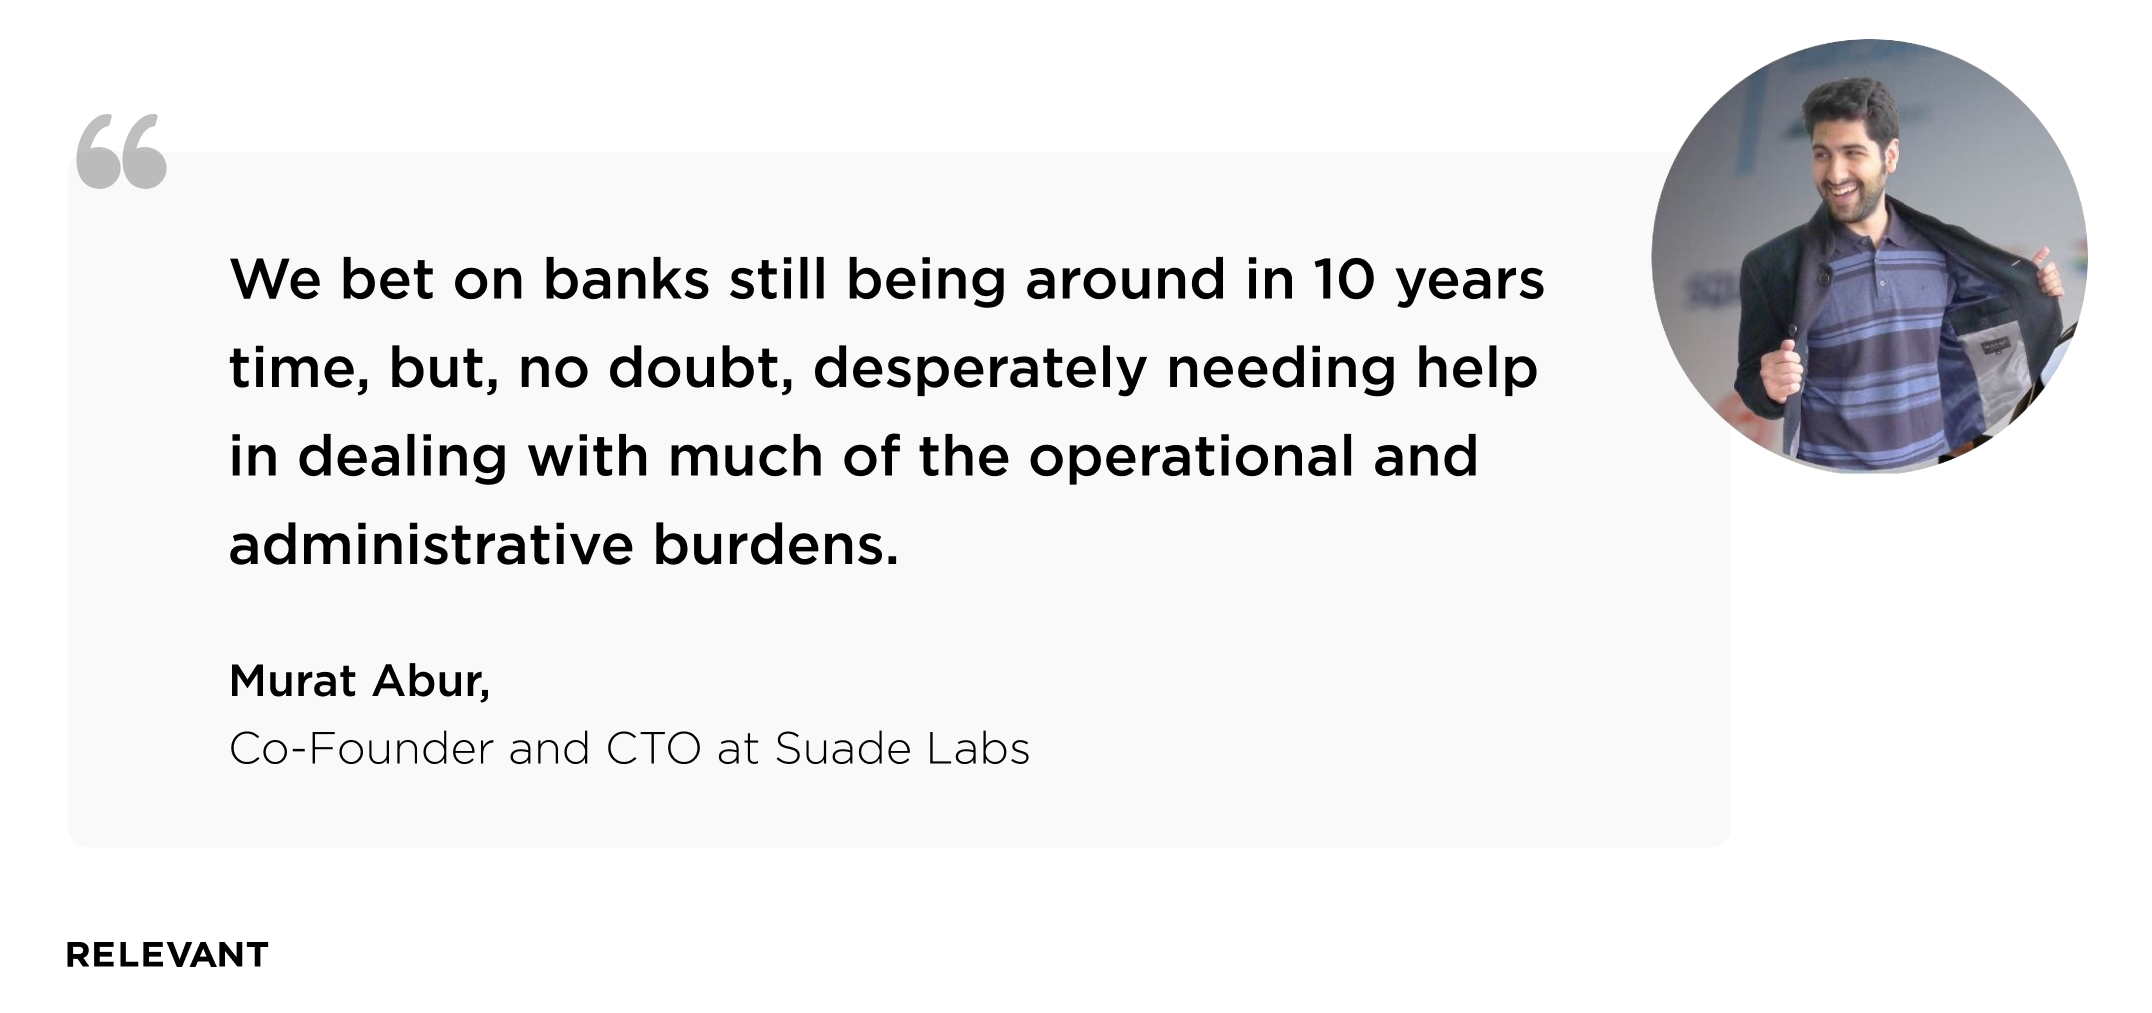 Murat Abur, co-founder and CTO at Suade Labs